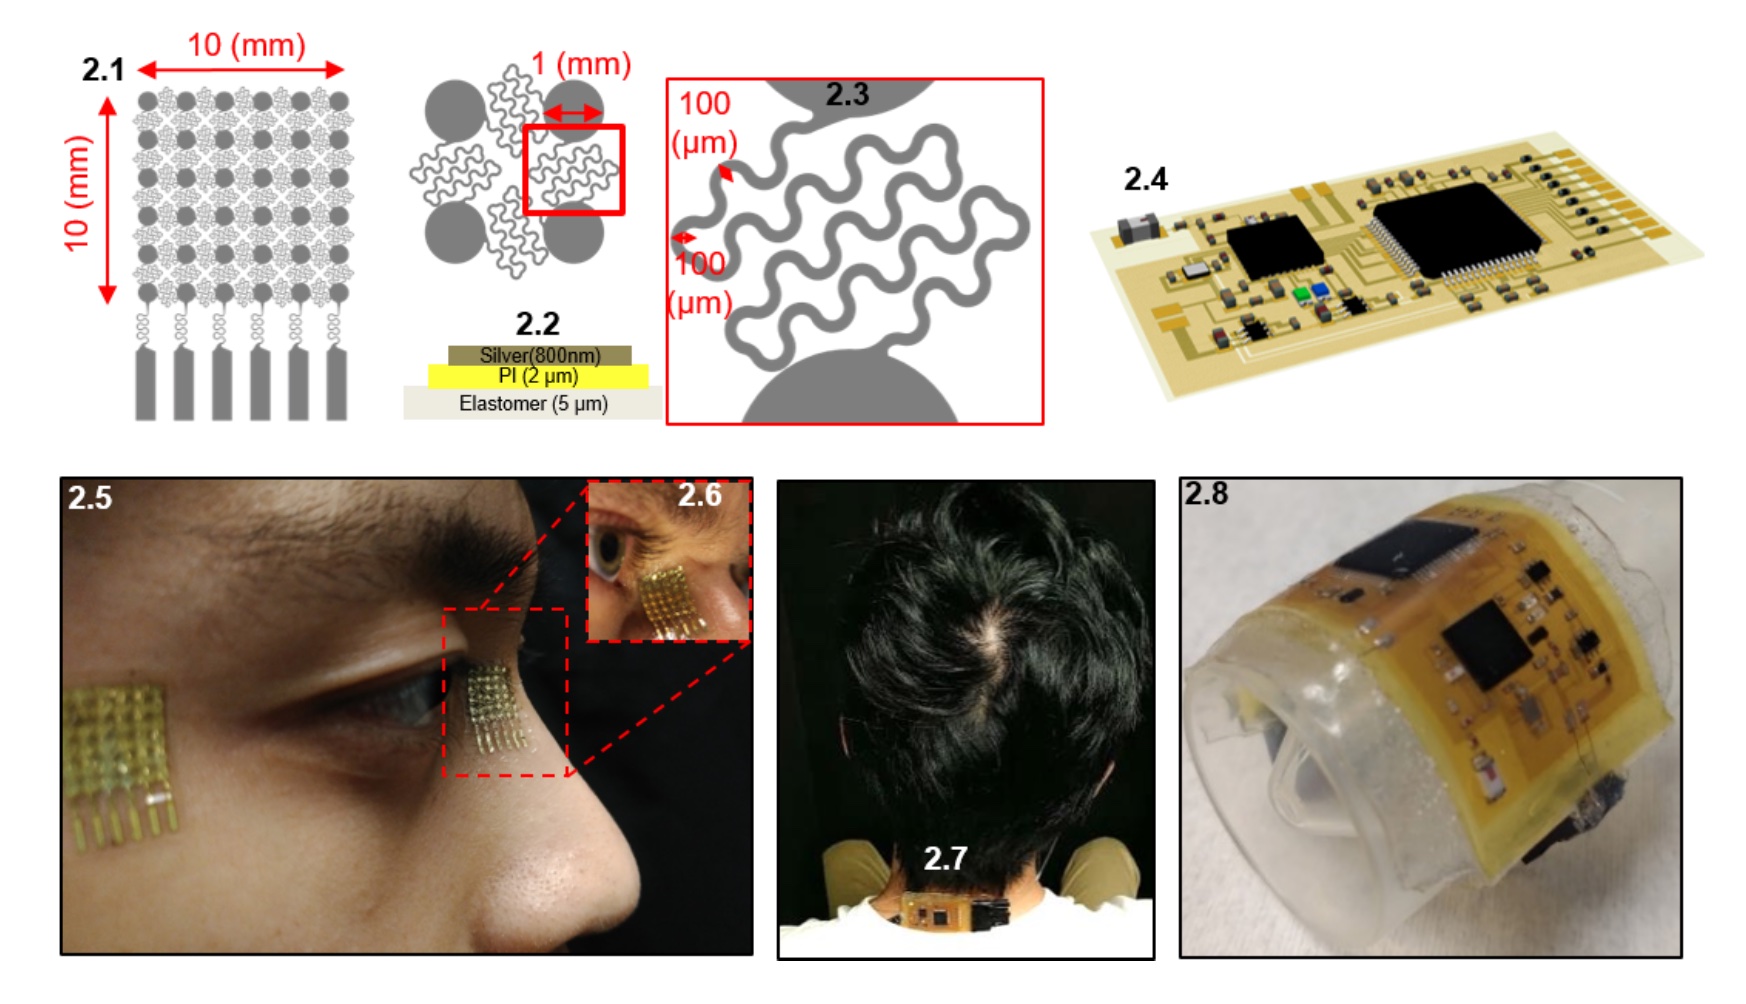 Multiple images illustrating overall skintronic setup. 2.1, 2.2, and 2.3: CAD design for skin-electrode at 10 mm x 10 mm, 1 mm, 100 µm. 2.4: Image of CAD design. 2.5 and 2.6: Photos of person in profile view showing the skin-electrode and skintronic devic